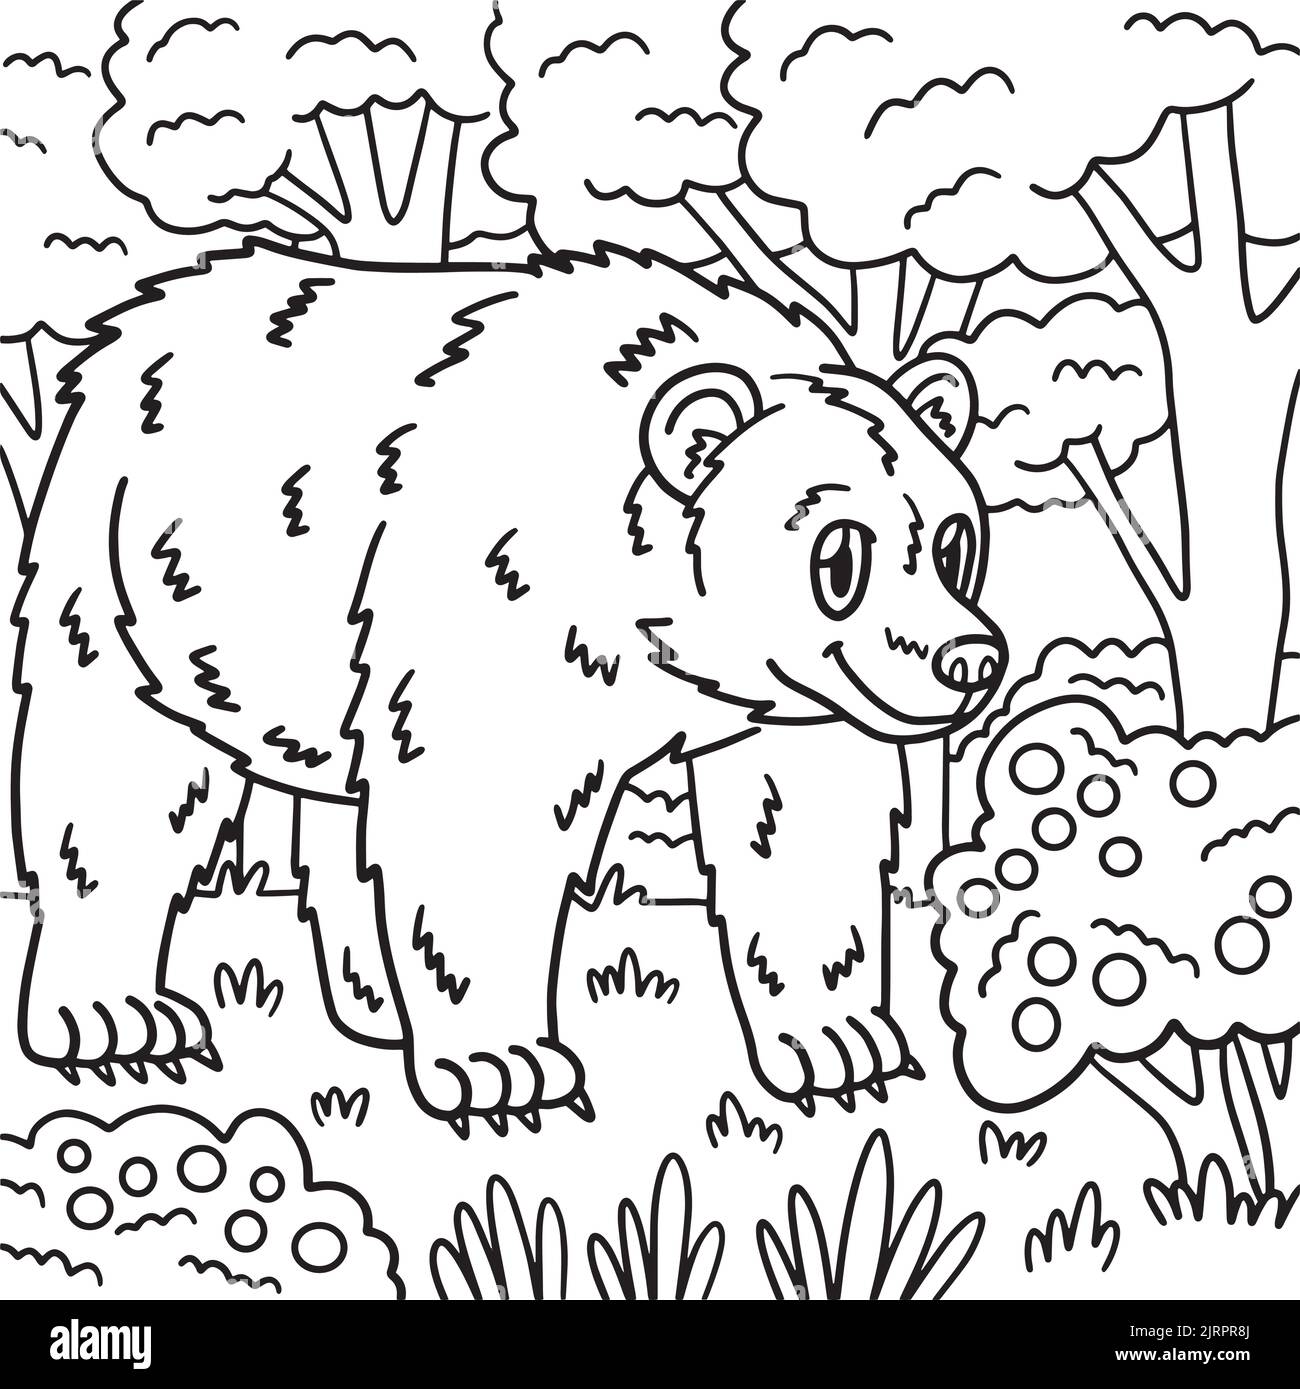 Bear Animal Coloring Page for Kids Stock Vector